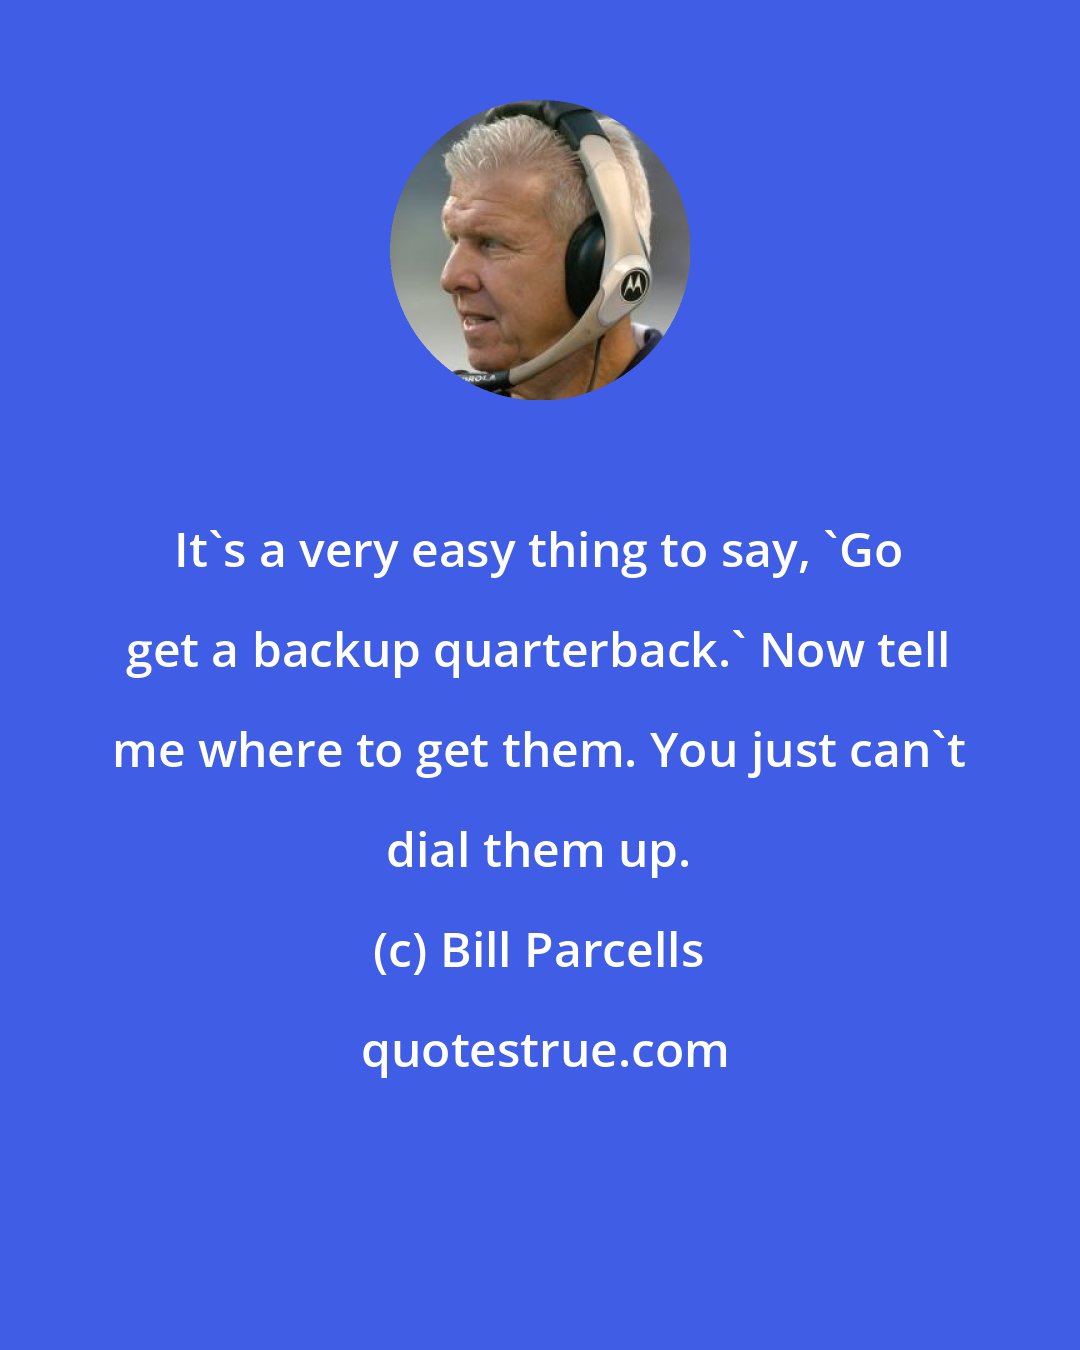 Bill Parcells: It's a very easy thing to say, 'Go get a backup quarterback.' Now tell me where to get them. You just can't dial them up.